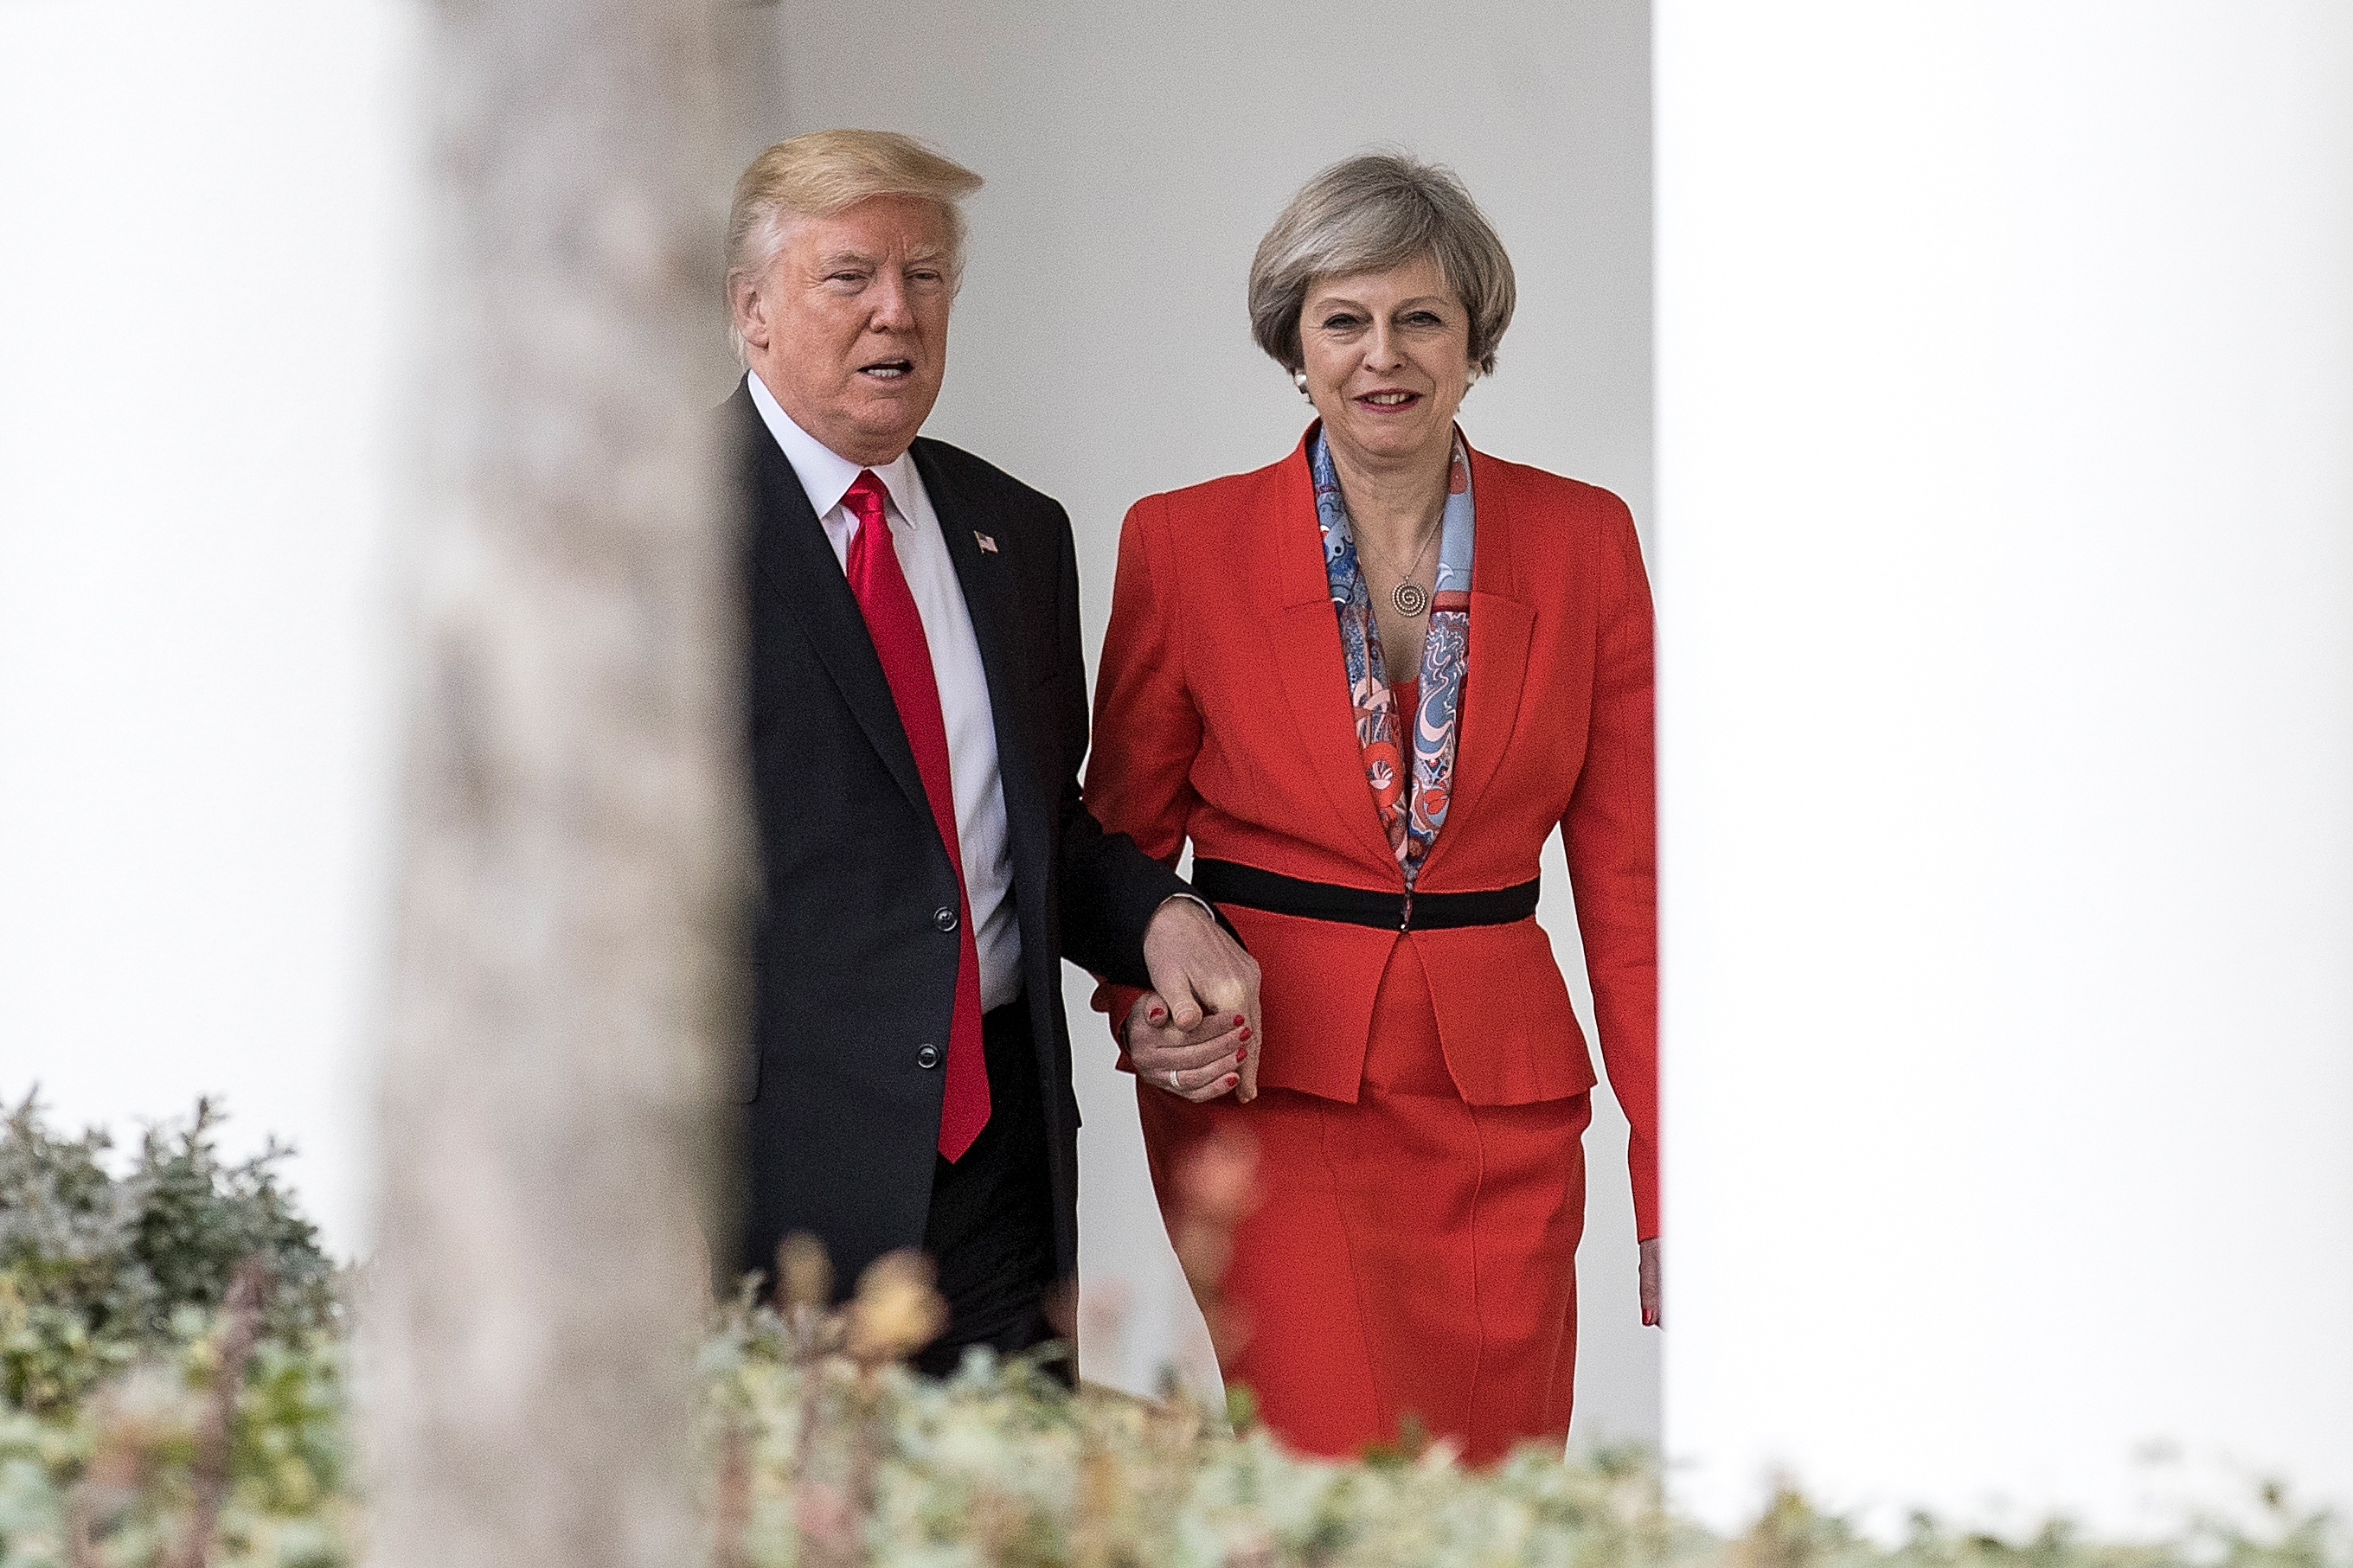 British Prime Minister Theresa May and U.S. President Donald Trump walk along The Colonnade of the West Wing at The White House on January 27, 2017 in Washington, DC. (Christopher Furlong—Getty Images)